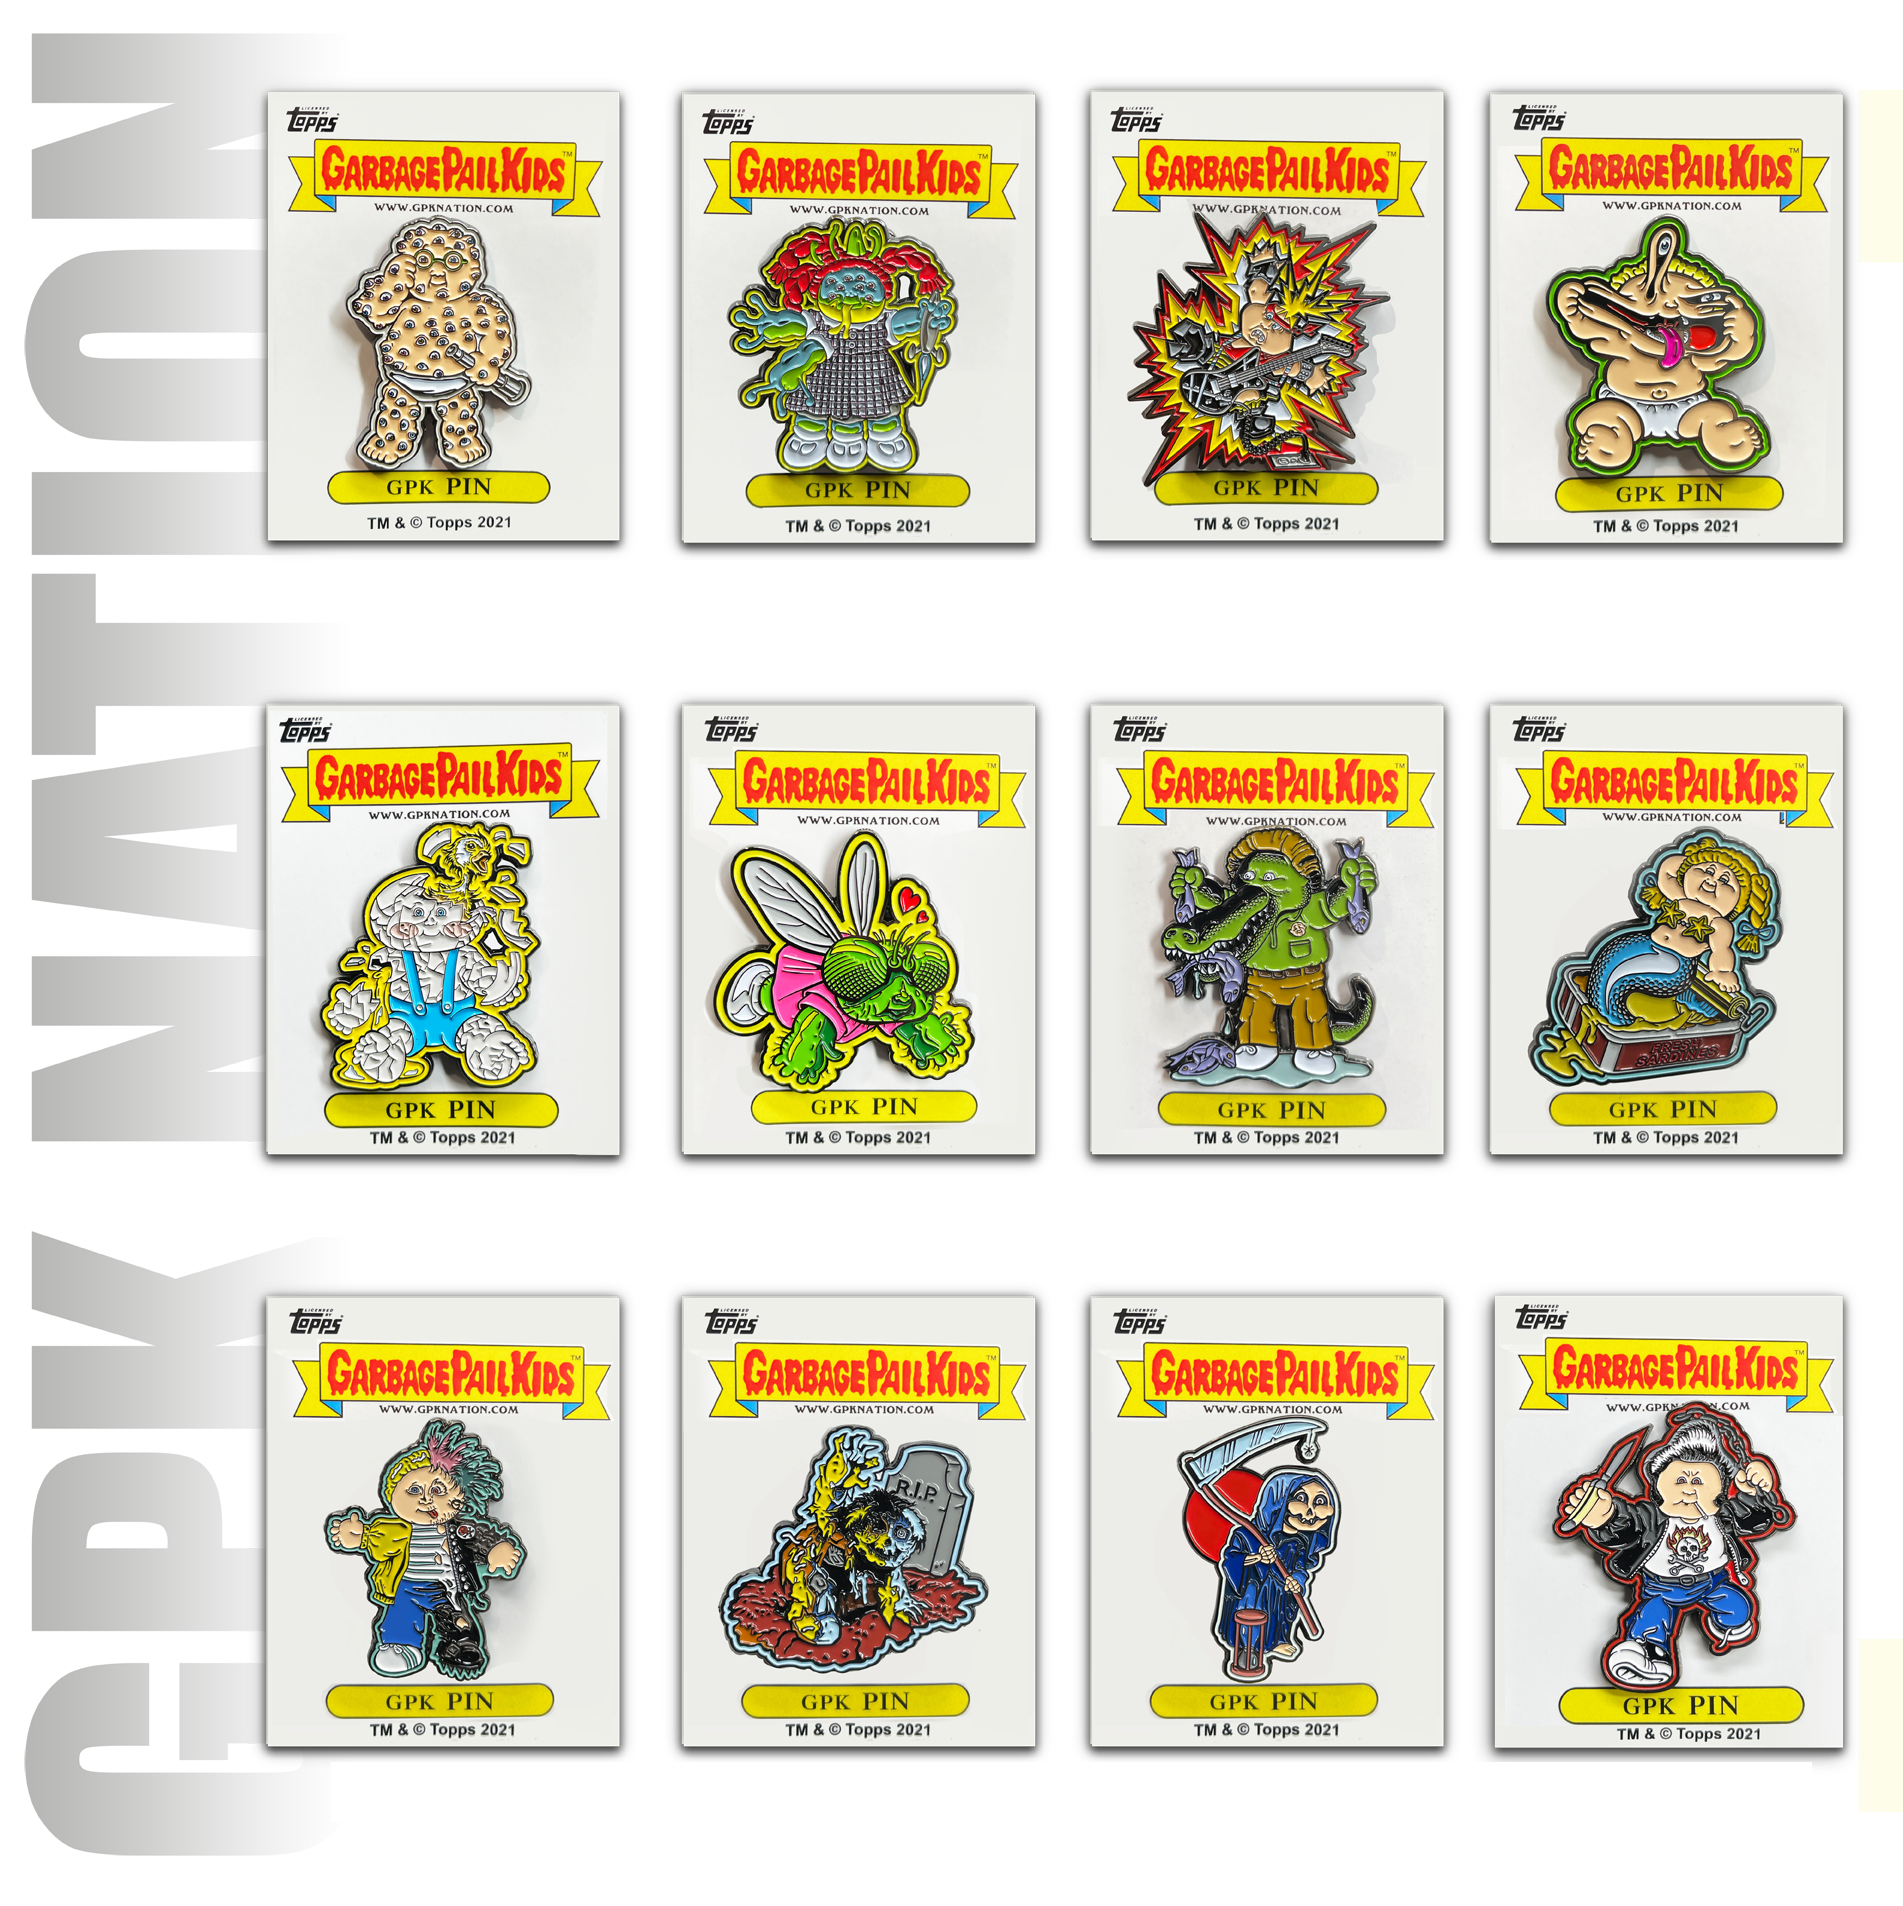 12 pin set Topps Officially Licensed GPK Pins 12 Garbage Pail Kids Limited Edition pins